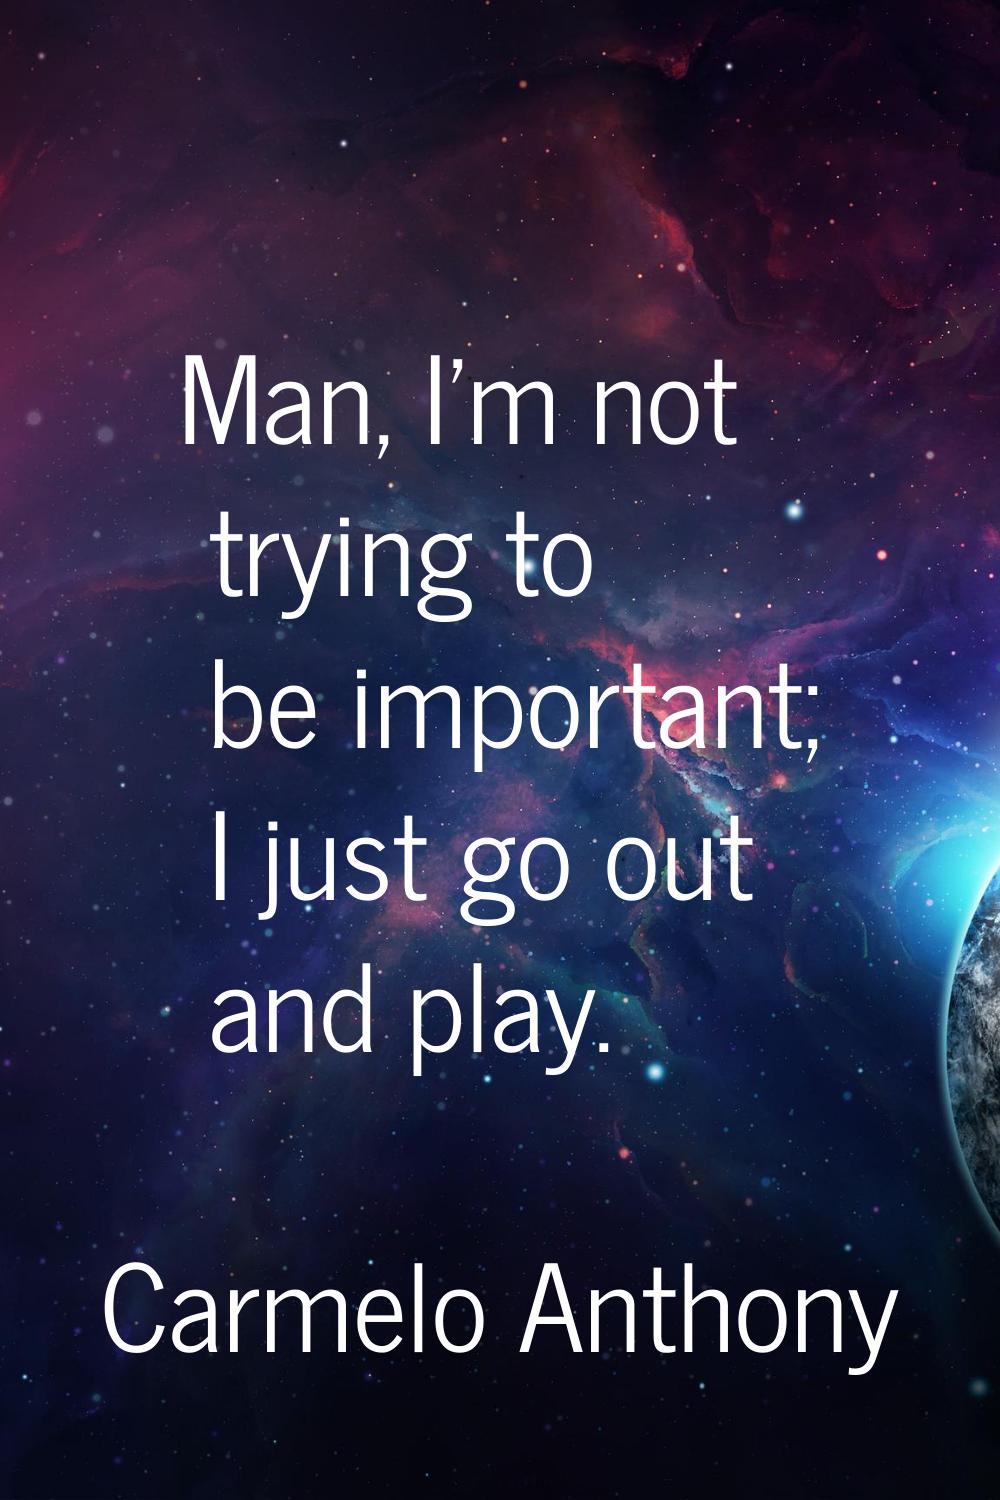 Man, I'm not trying to be important; I just go out and play.